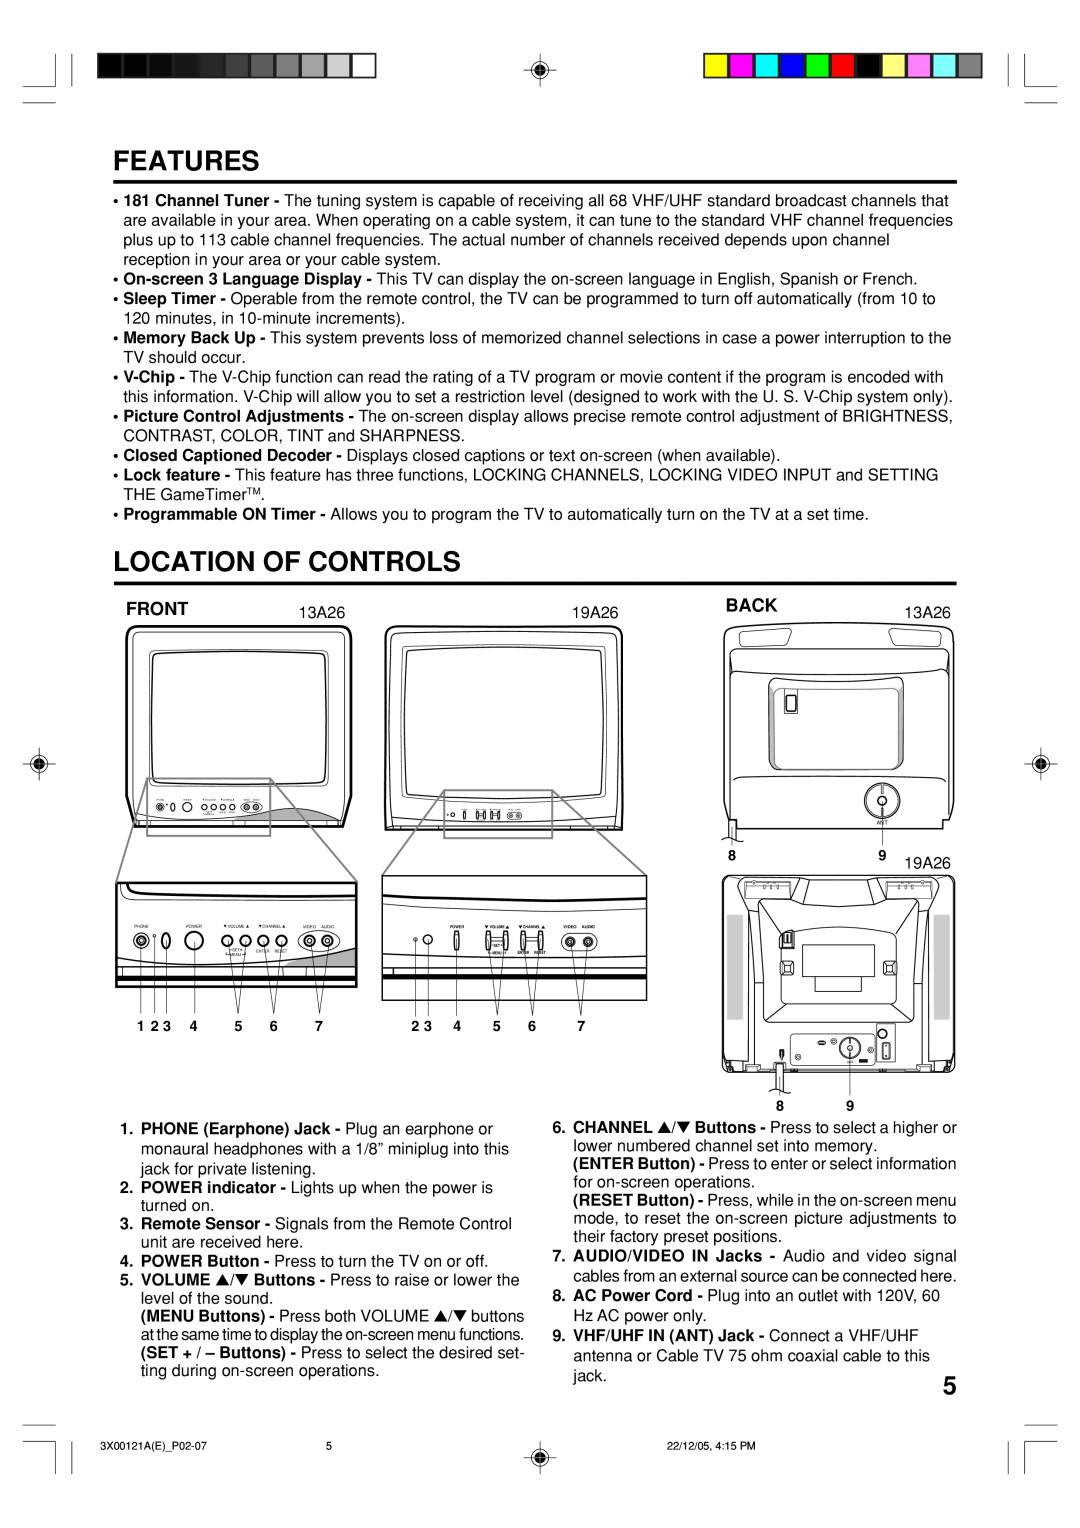 Toshiba 13A26 manual Features, Location Of Controls, Front, Back 